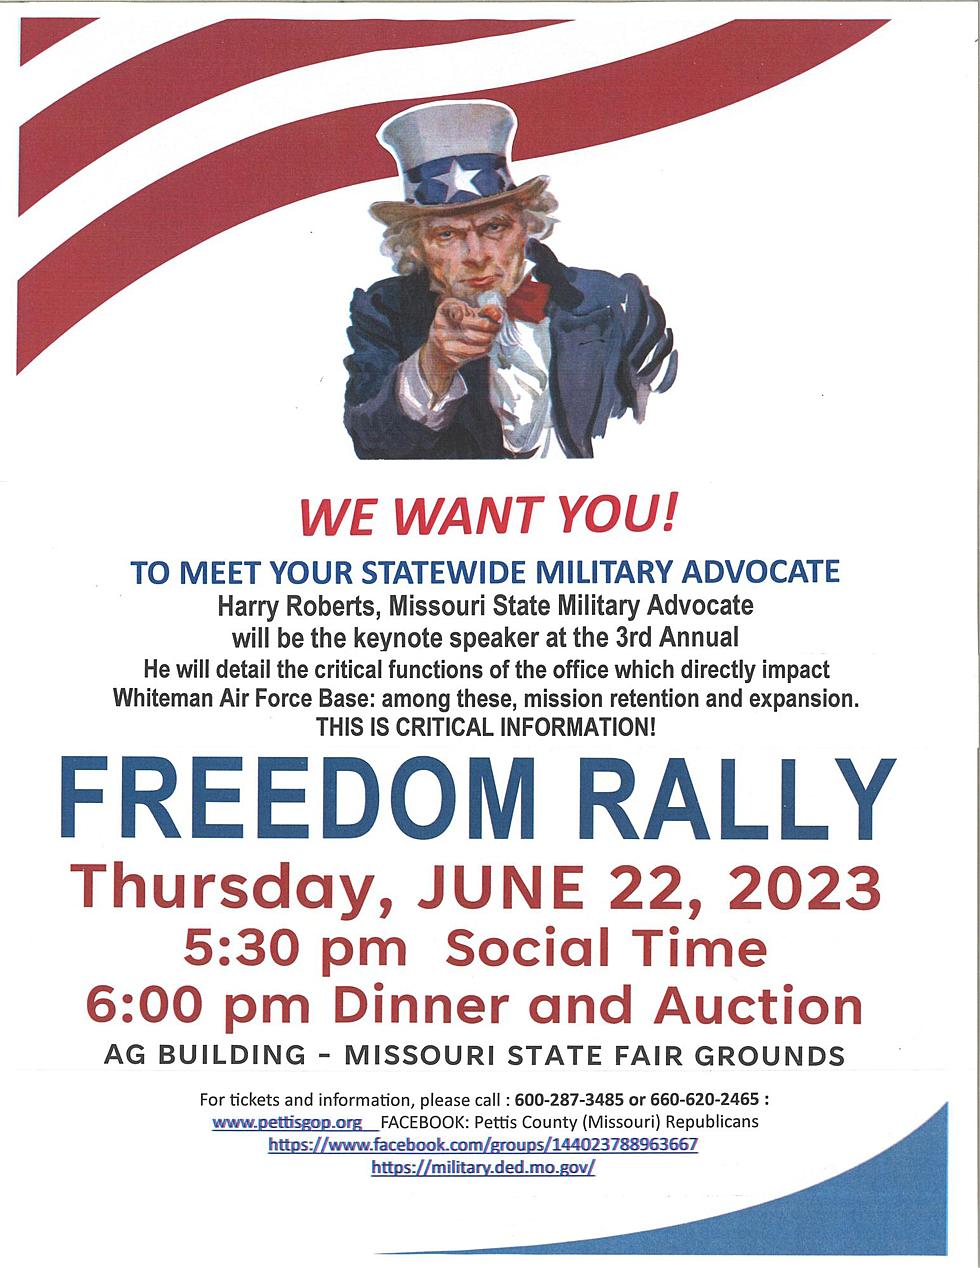 McKinley Day’s ‘Freedom Rally’ Thursday at Ag Building